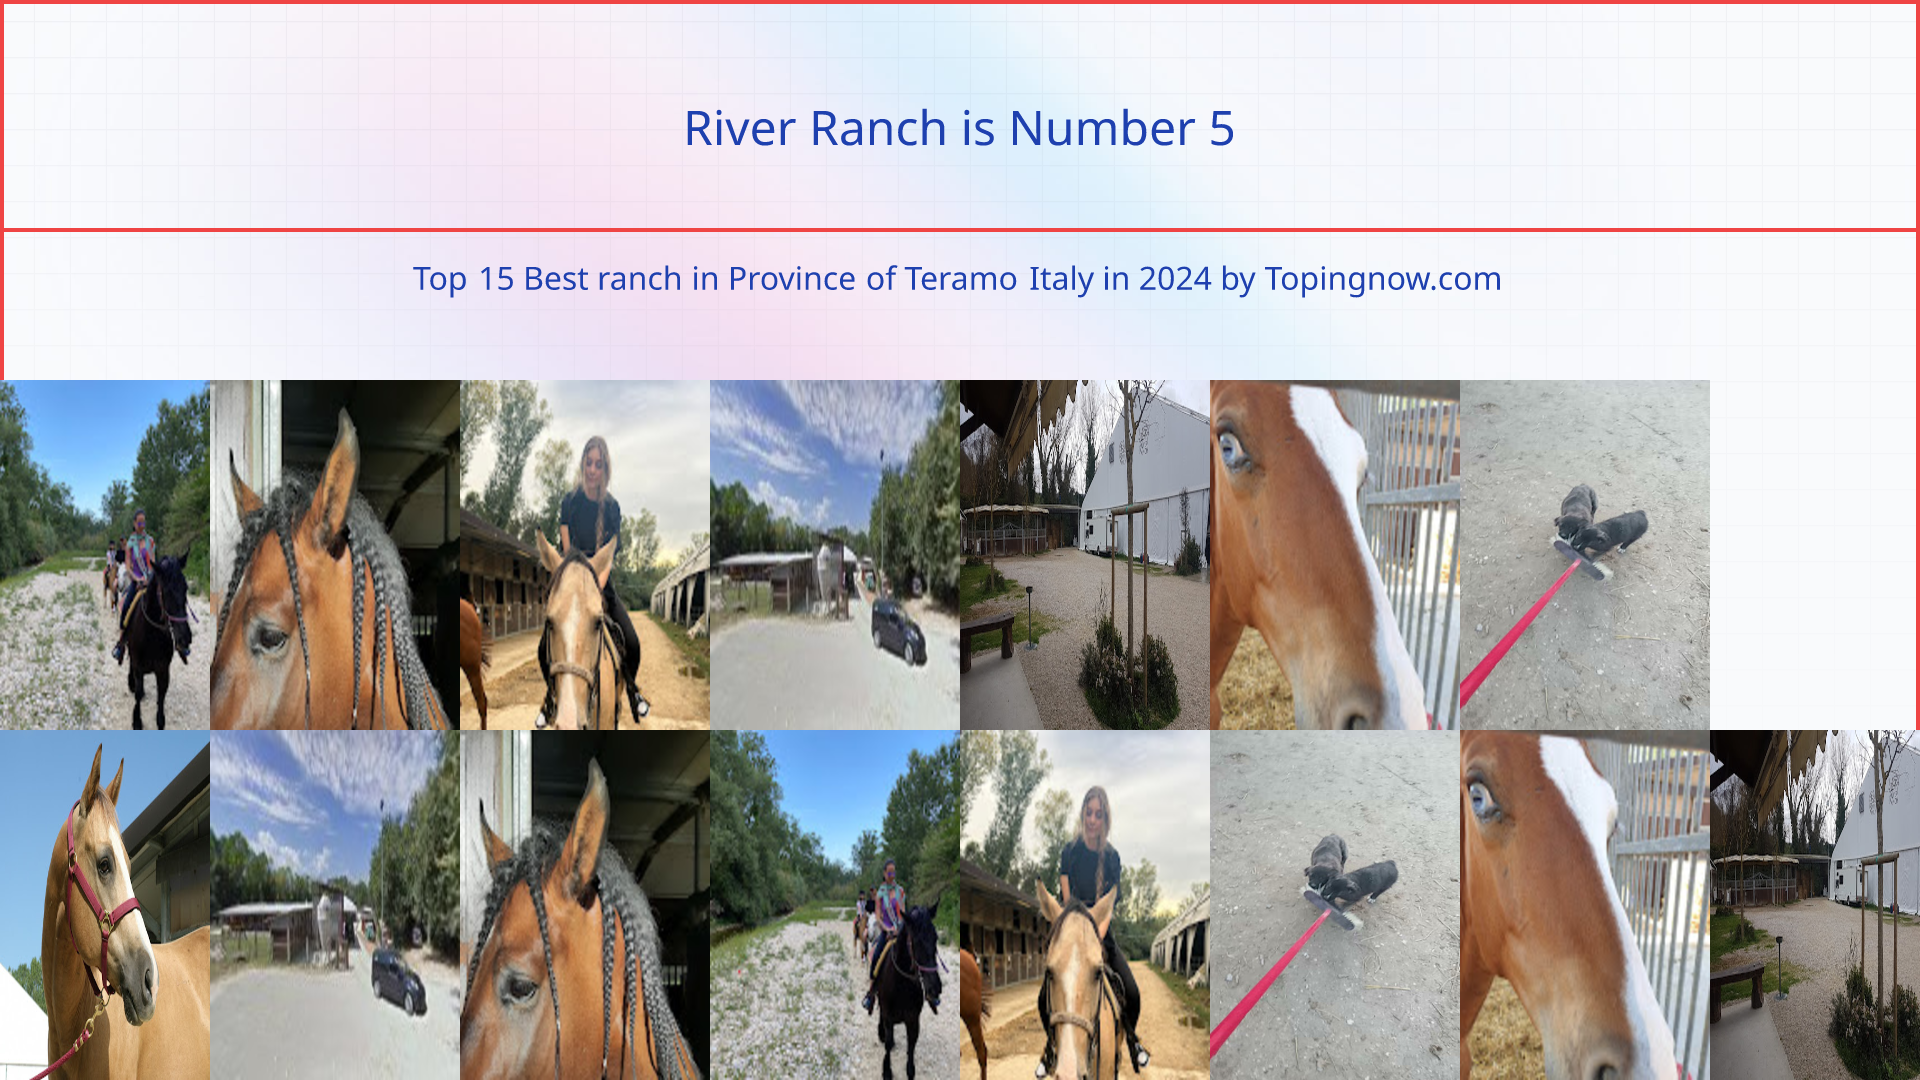 River Ranch: Top 15 Best ranch in Province of Teramo Italy in 2024